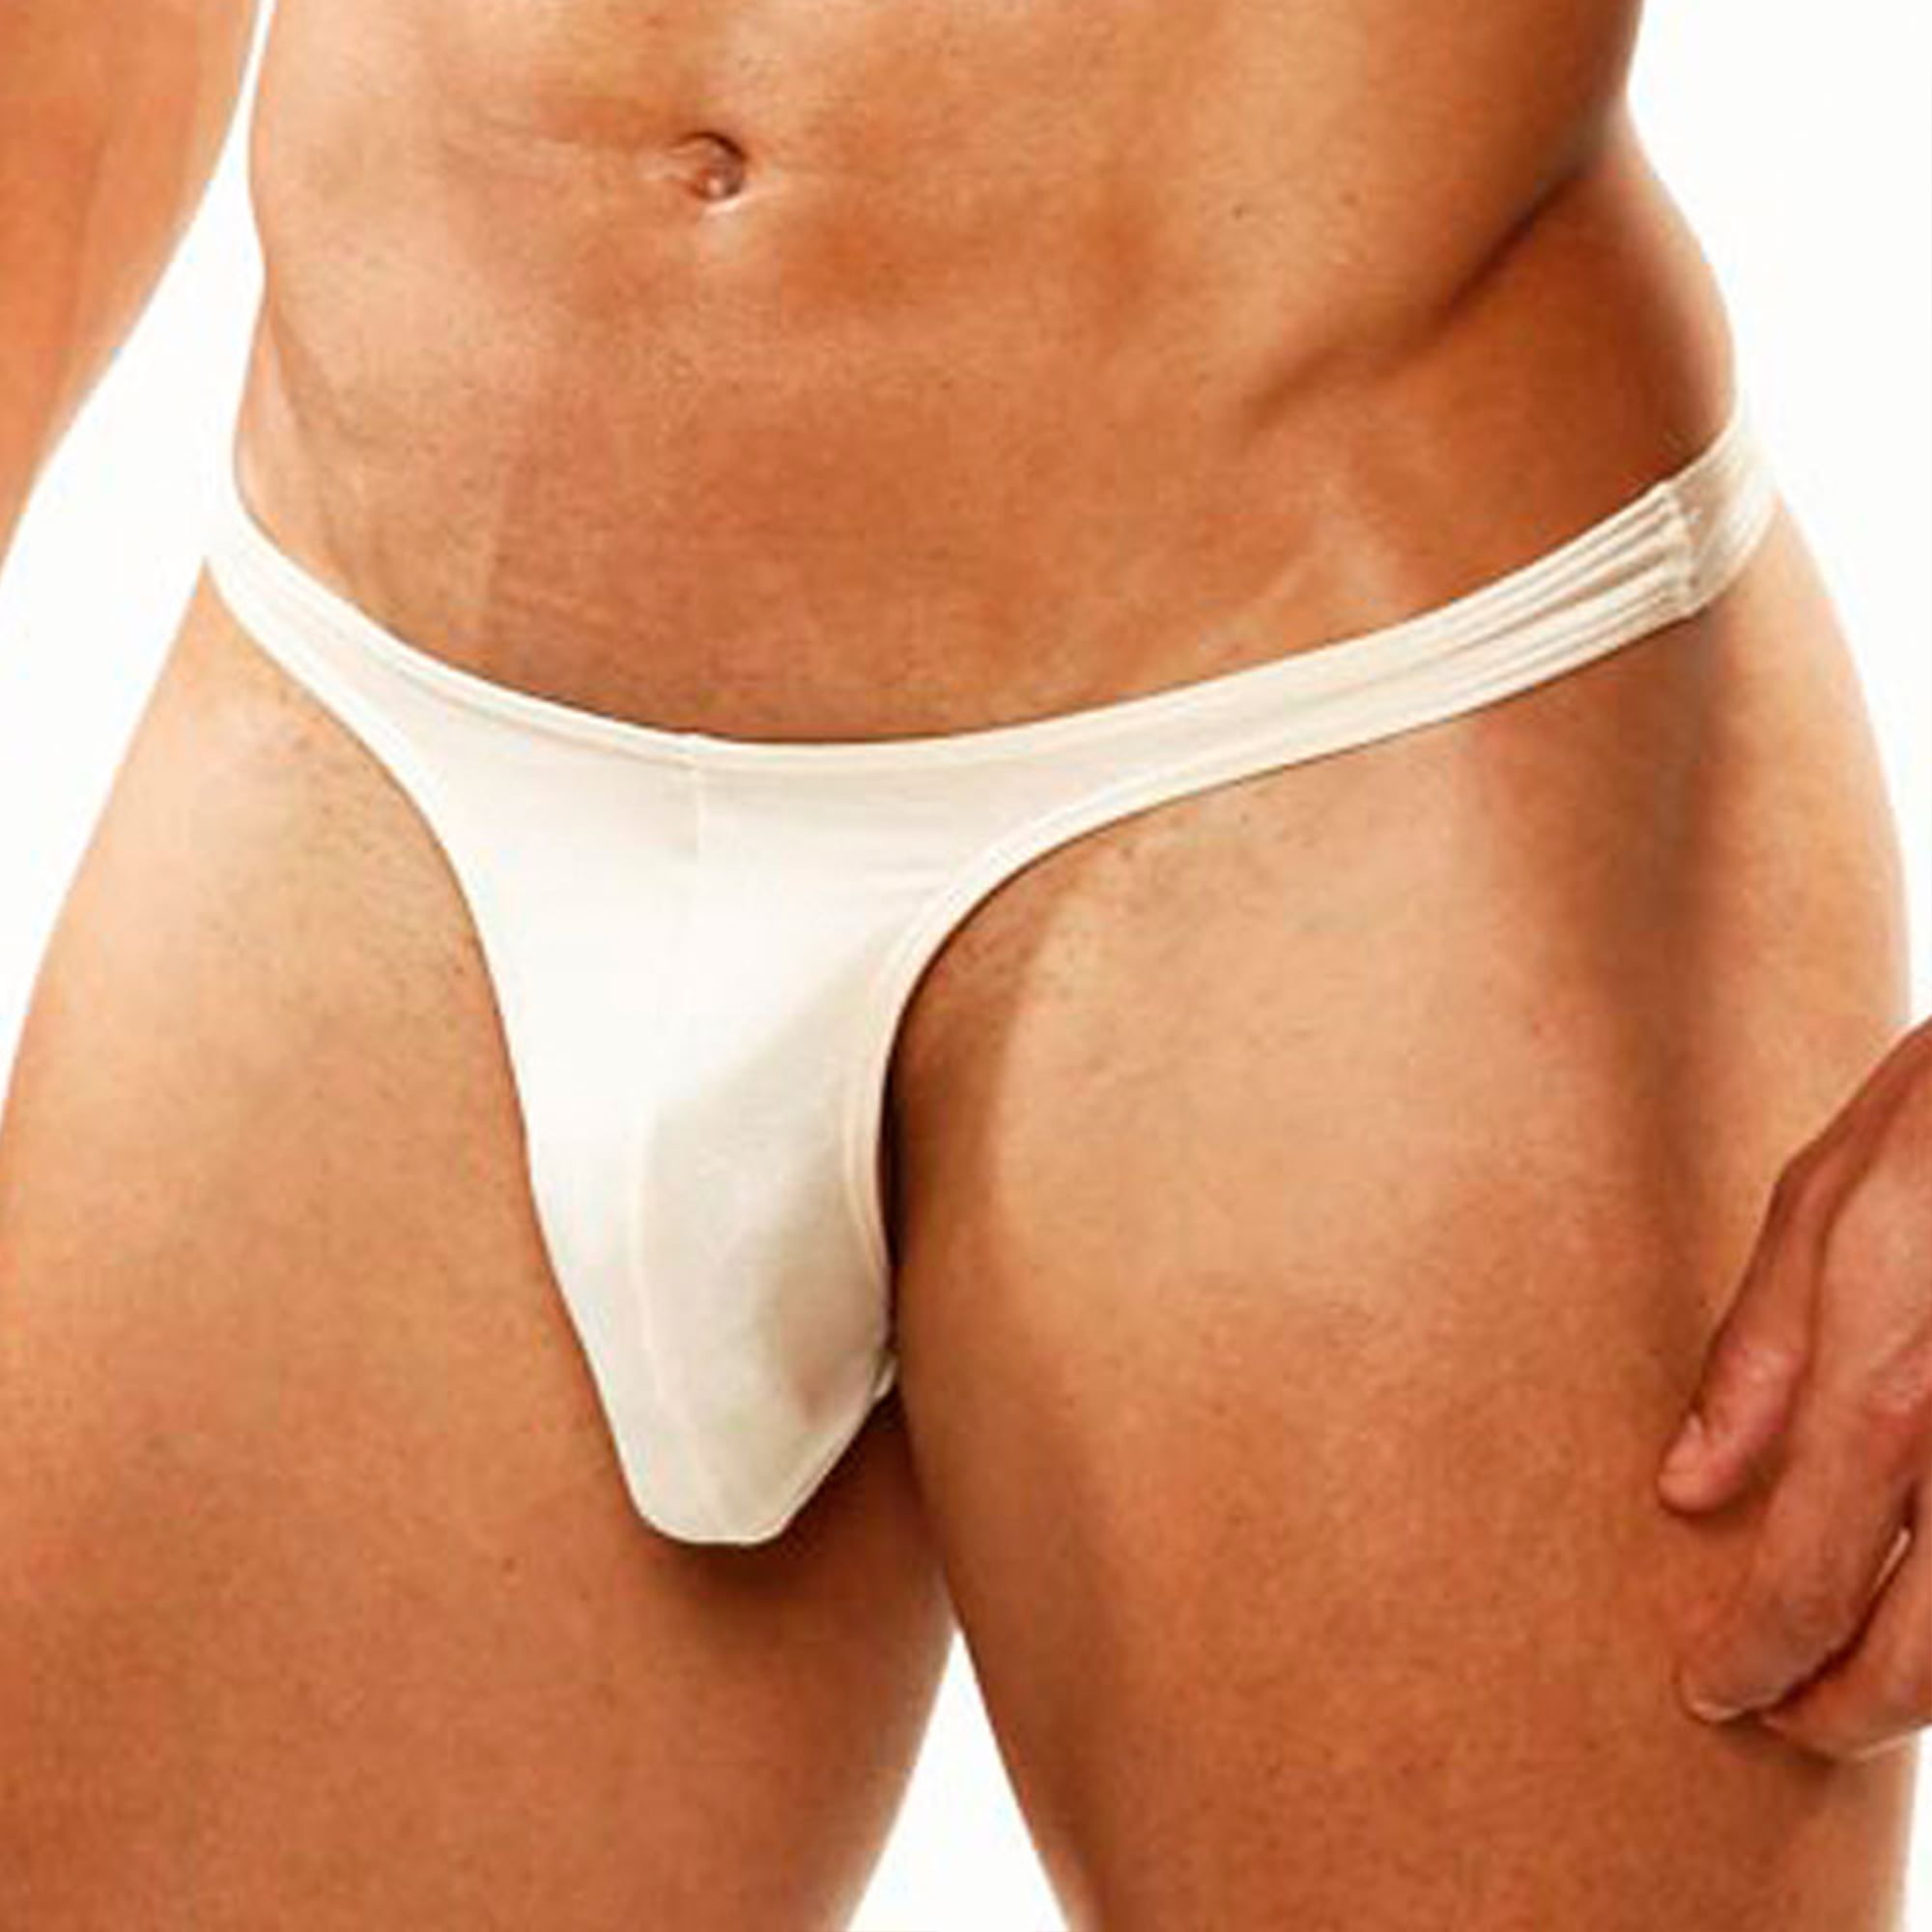 Cover Male Skimpy Thong Red CM111 at International Jock